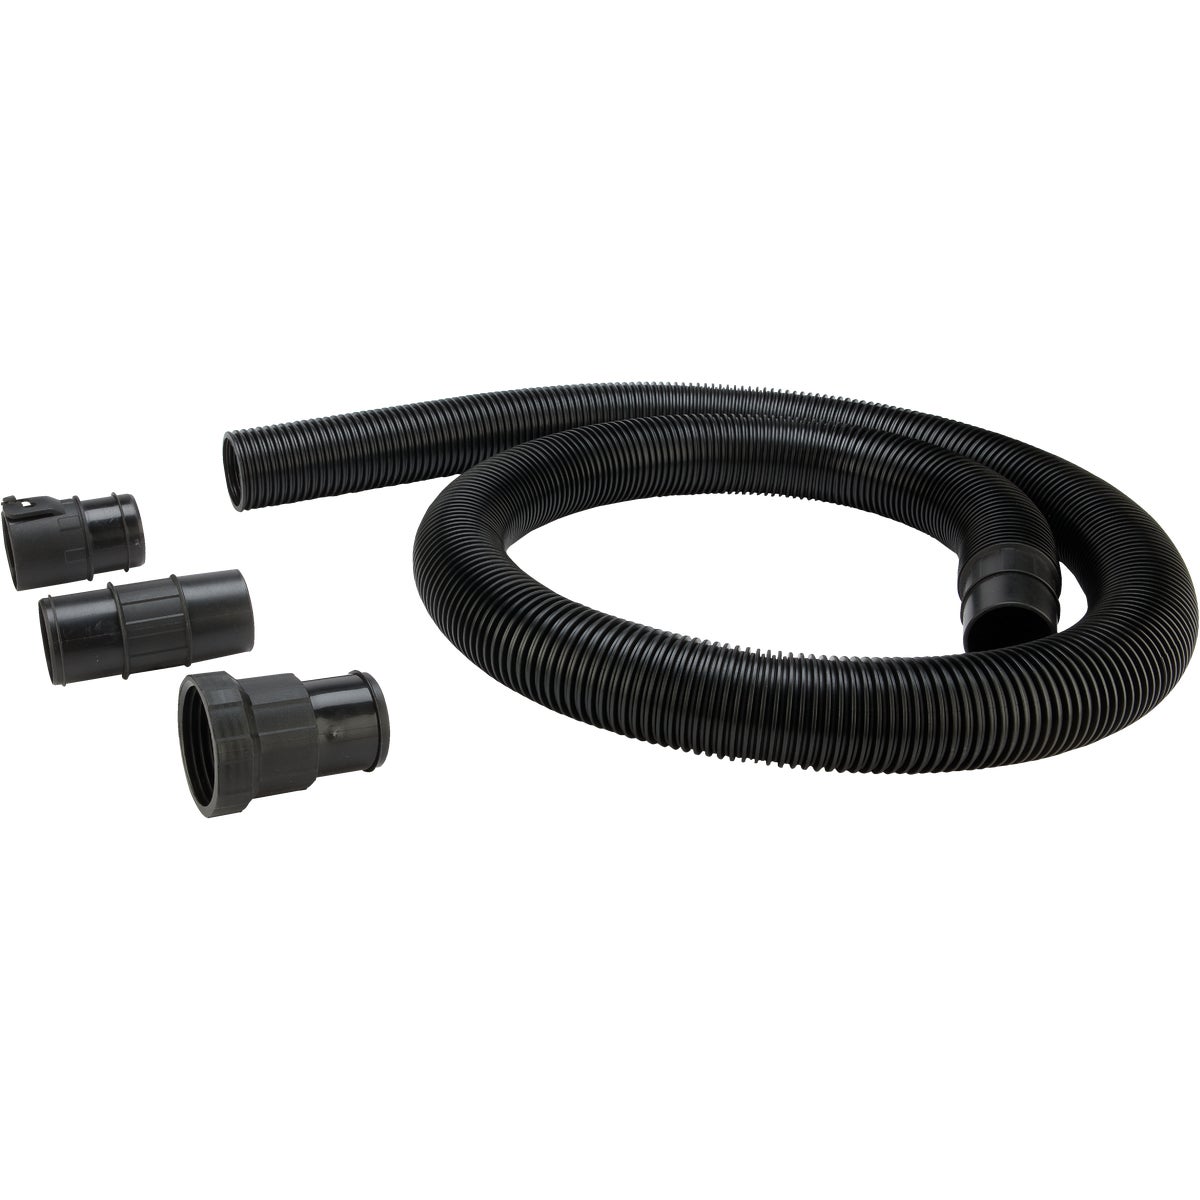 Channellock 2-1/2 In. Dia. x 7 Ft. L Black Plastic Wet/Dry Vacuum Hose with Adapters